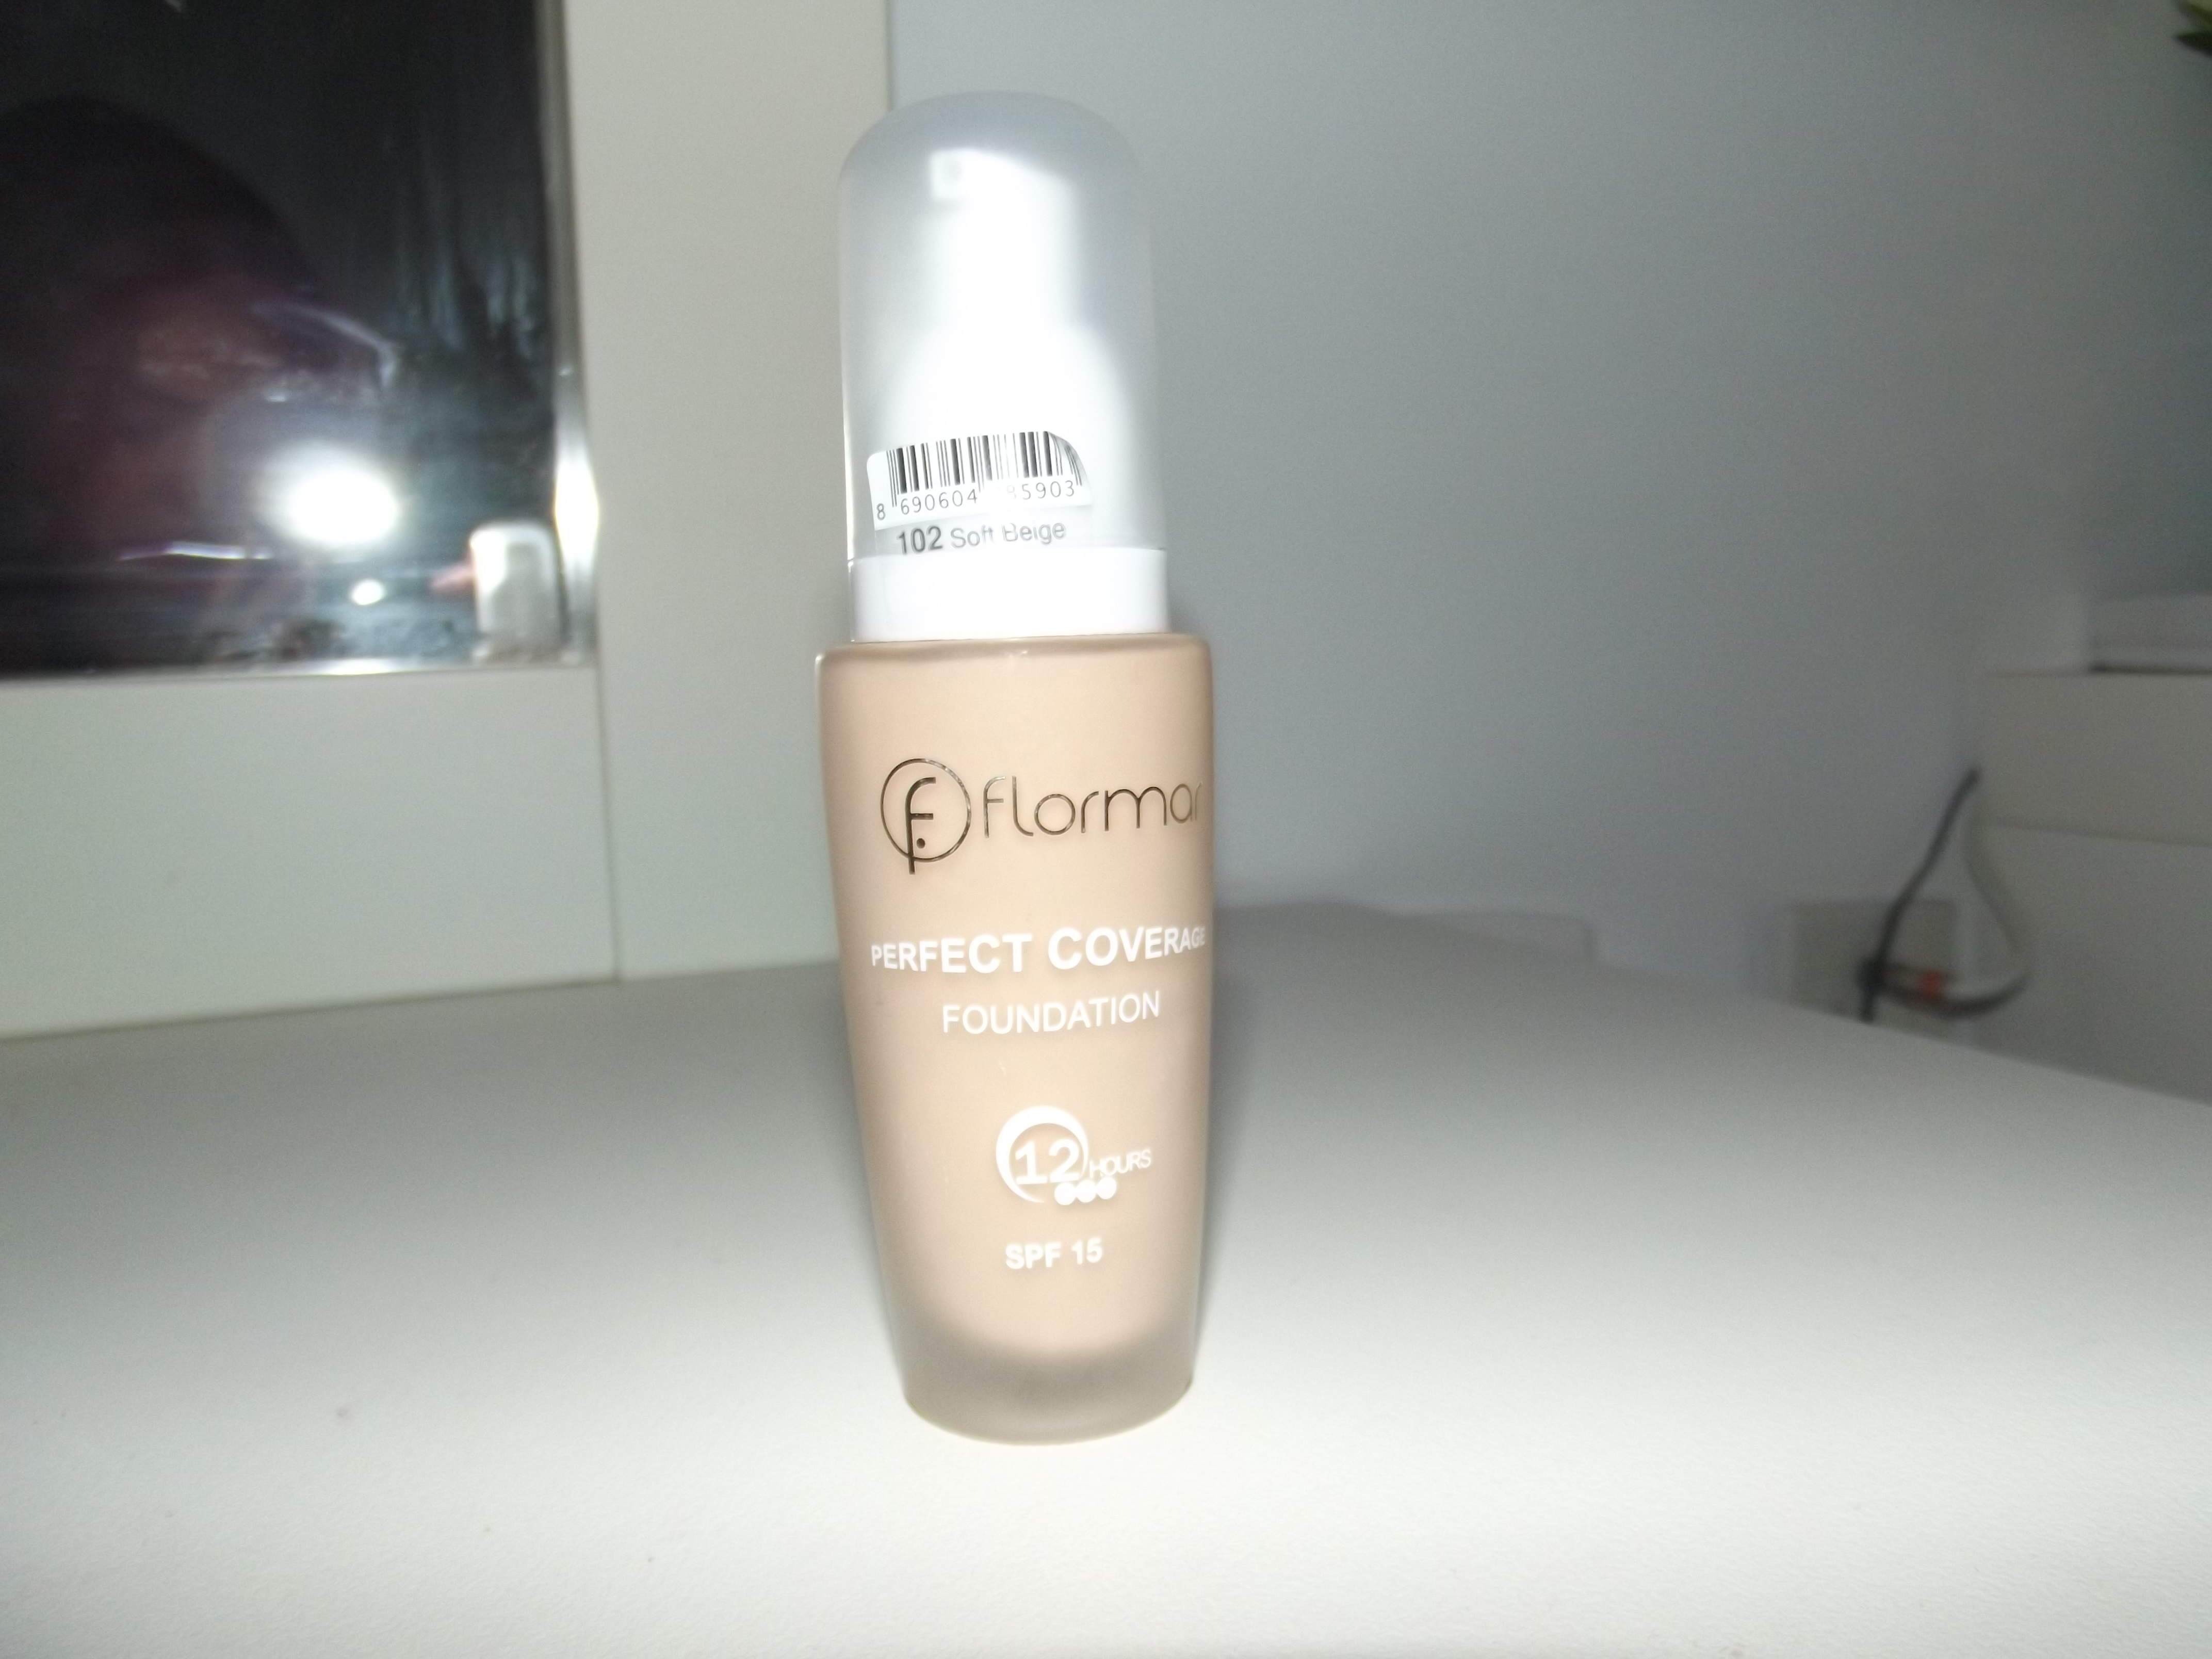 Product of the Day: Flormar Perfect Coverage Foundation